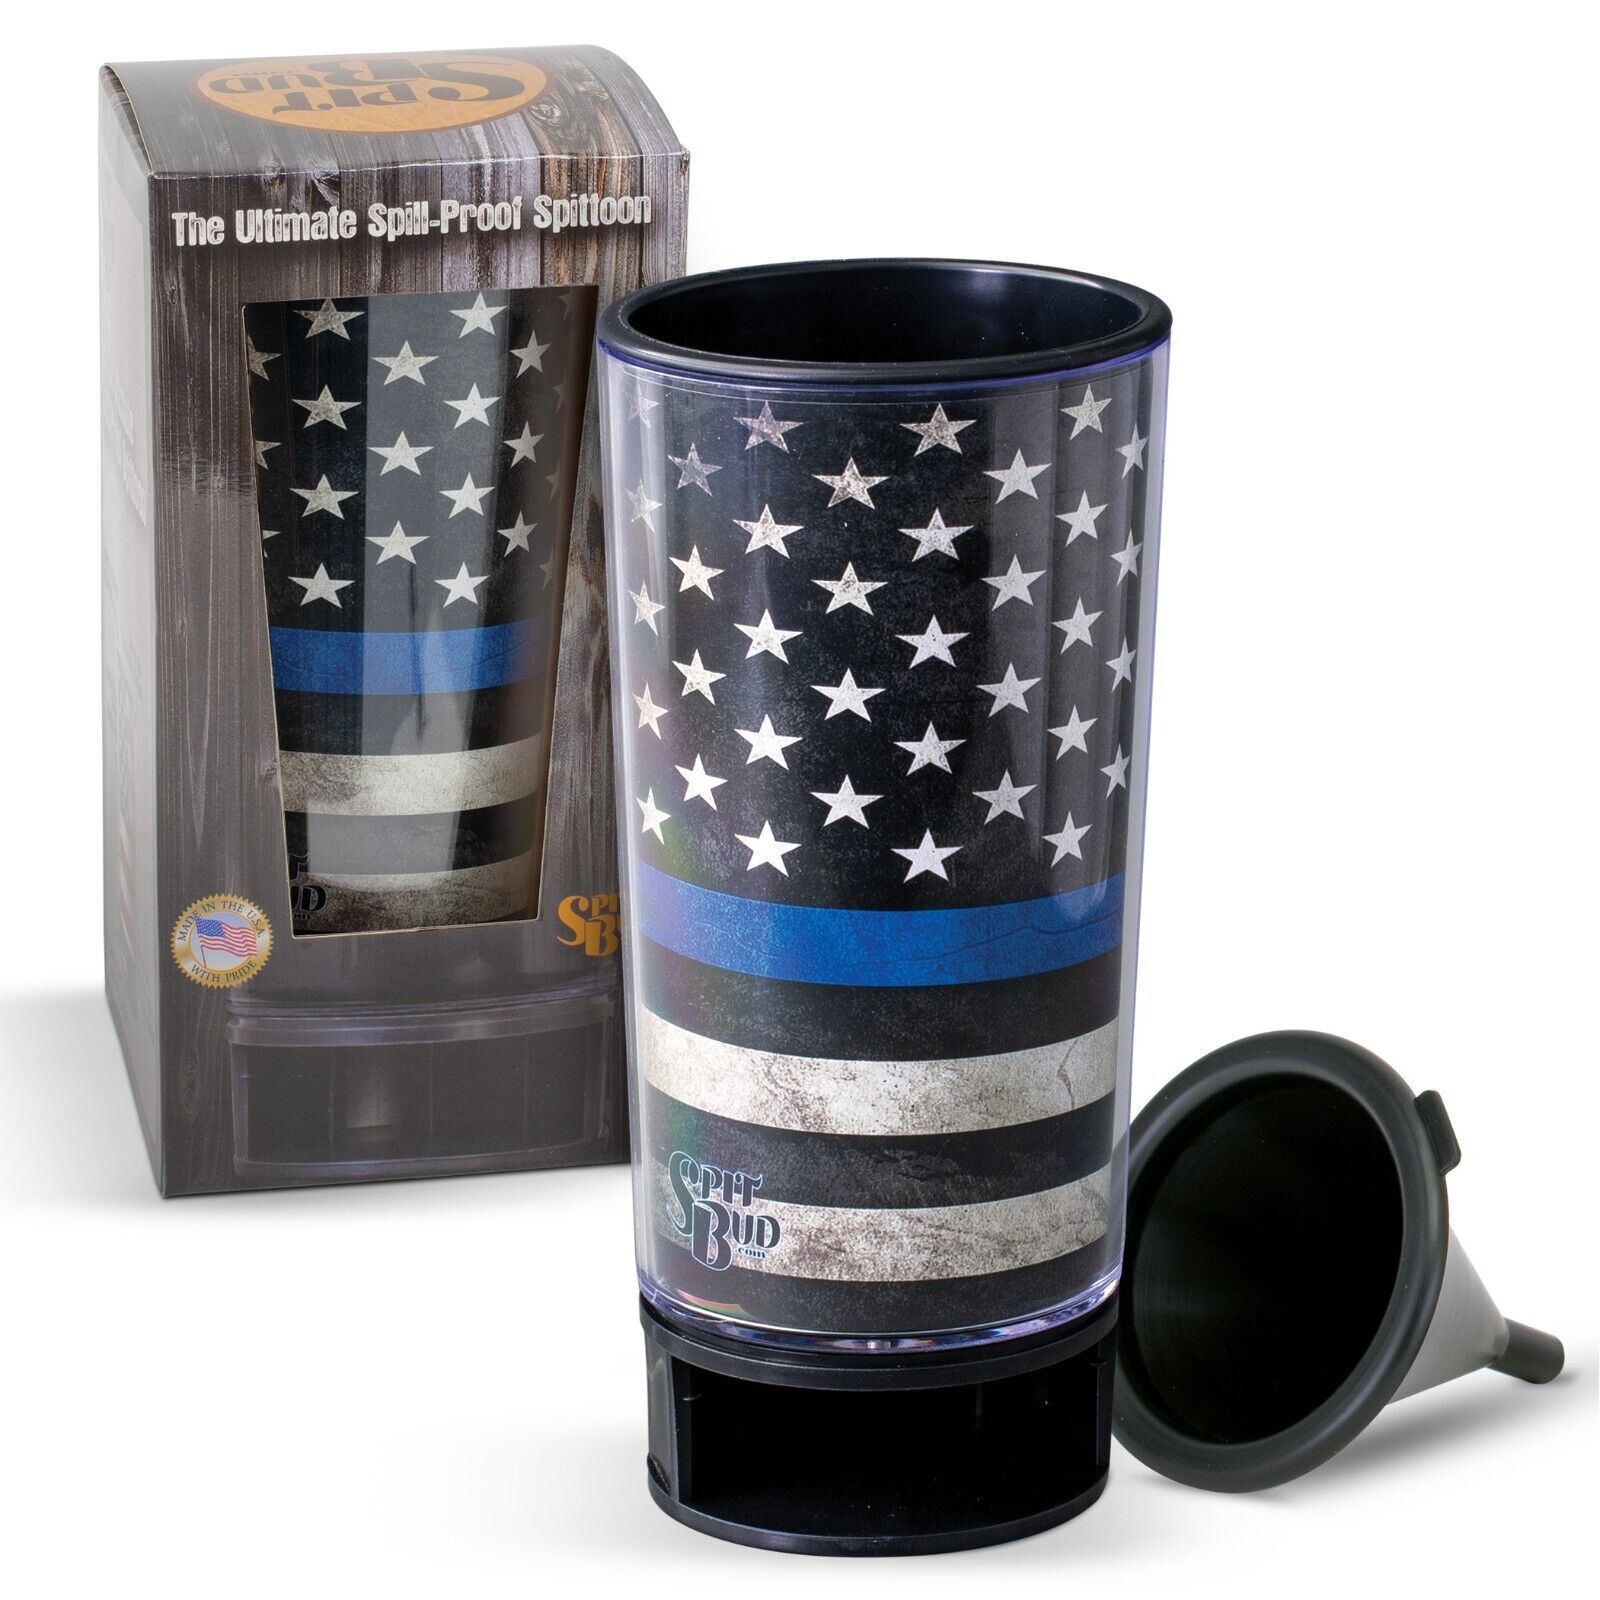 Spit Bud The Ultimate Spill Proof Portable Spittoon - Blue Lives Matter USA Flag